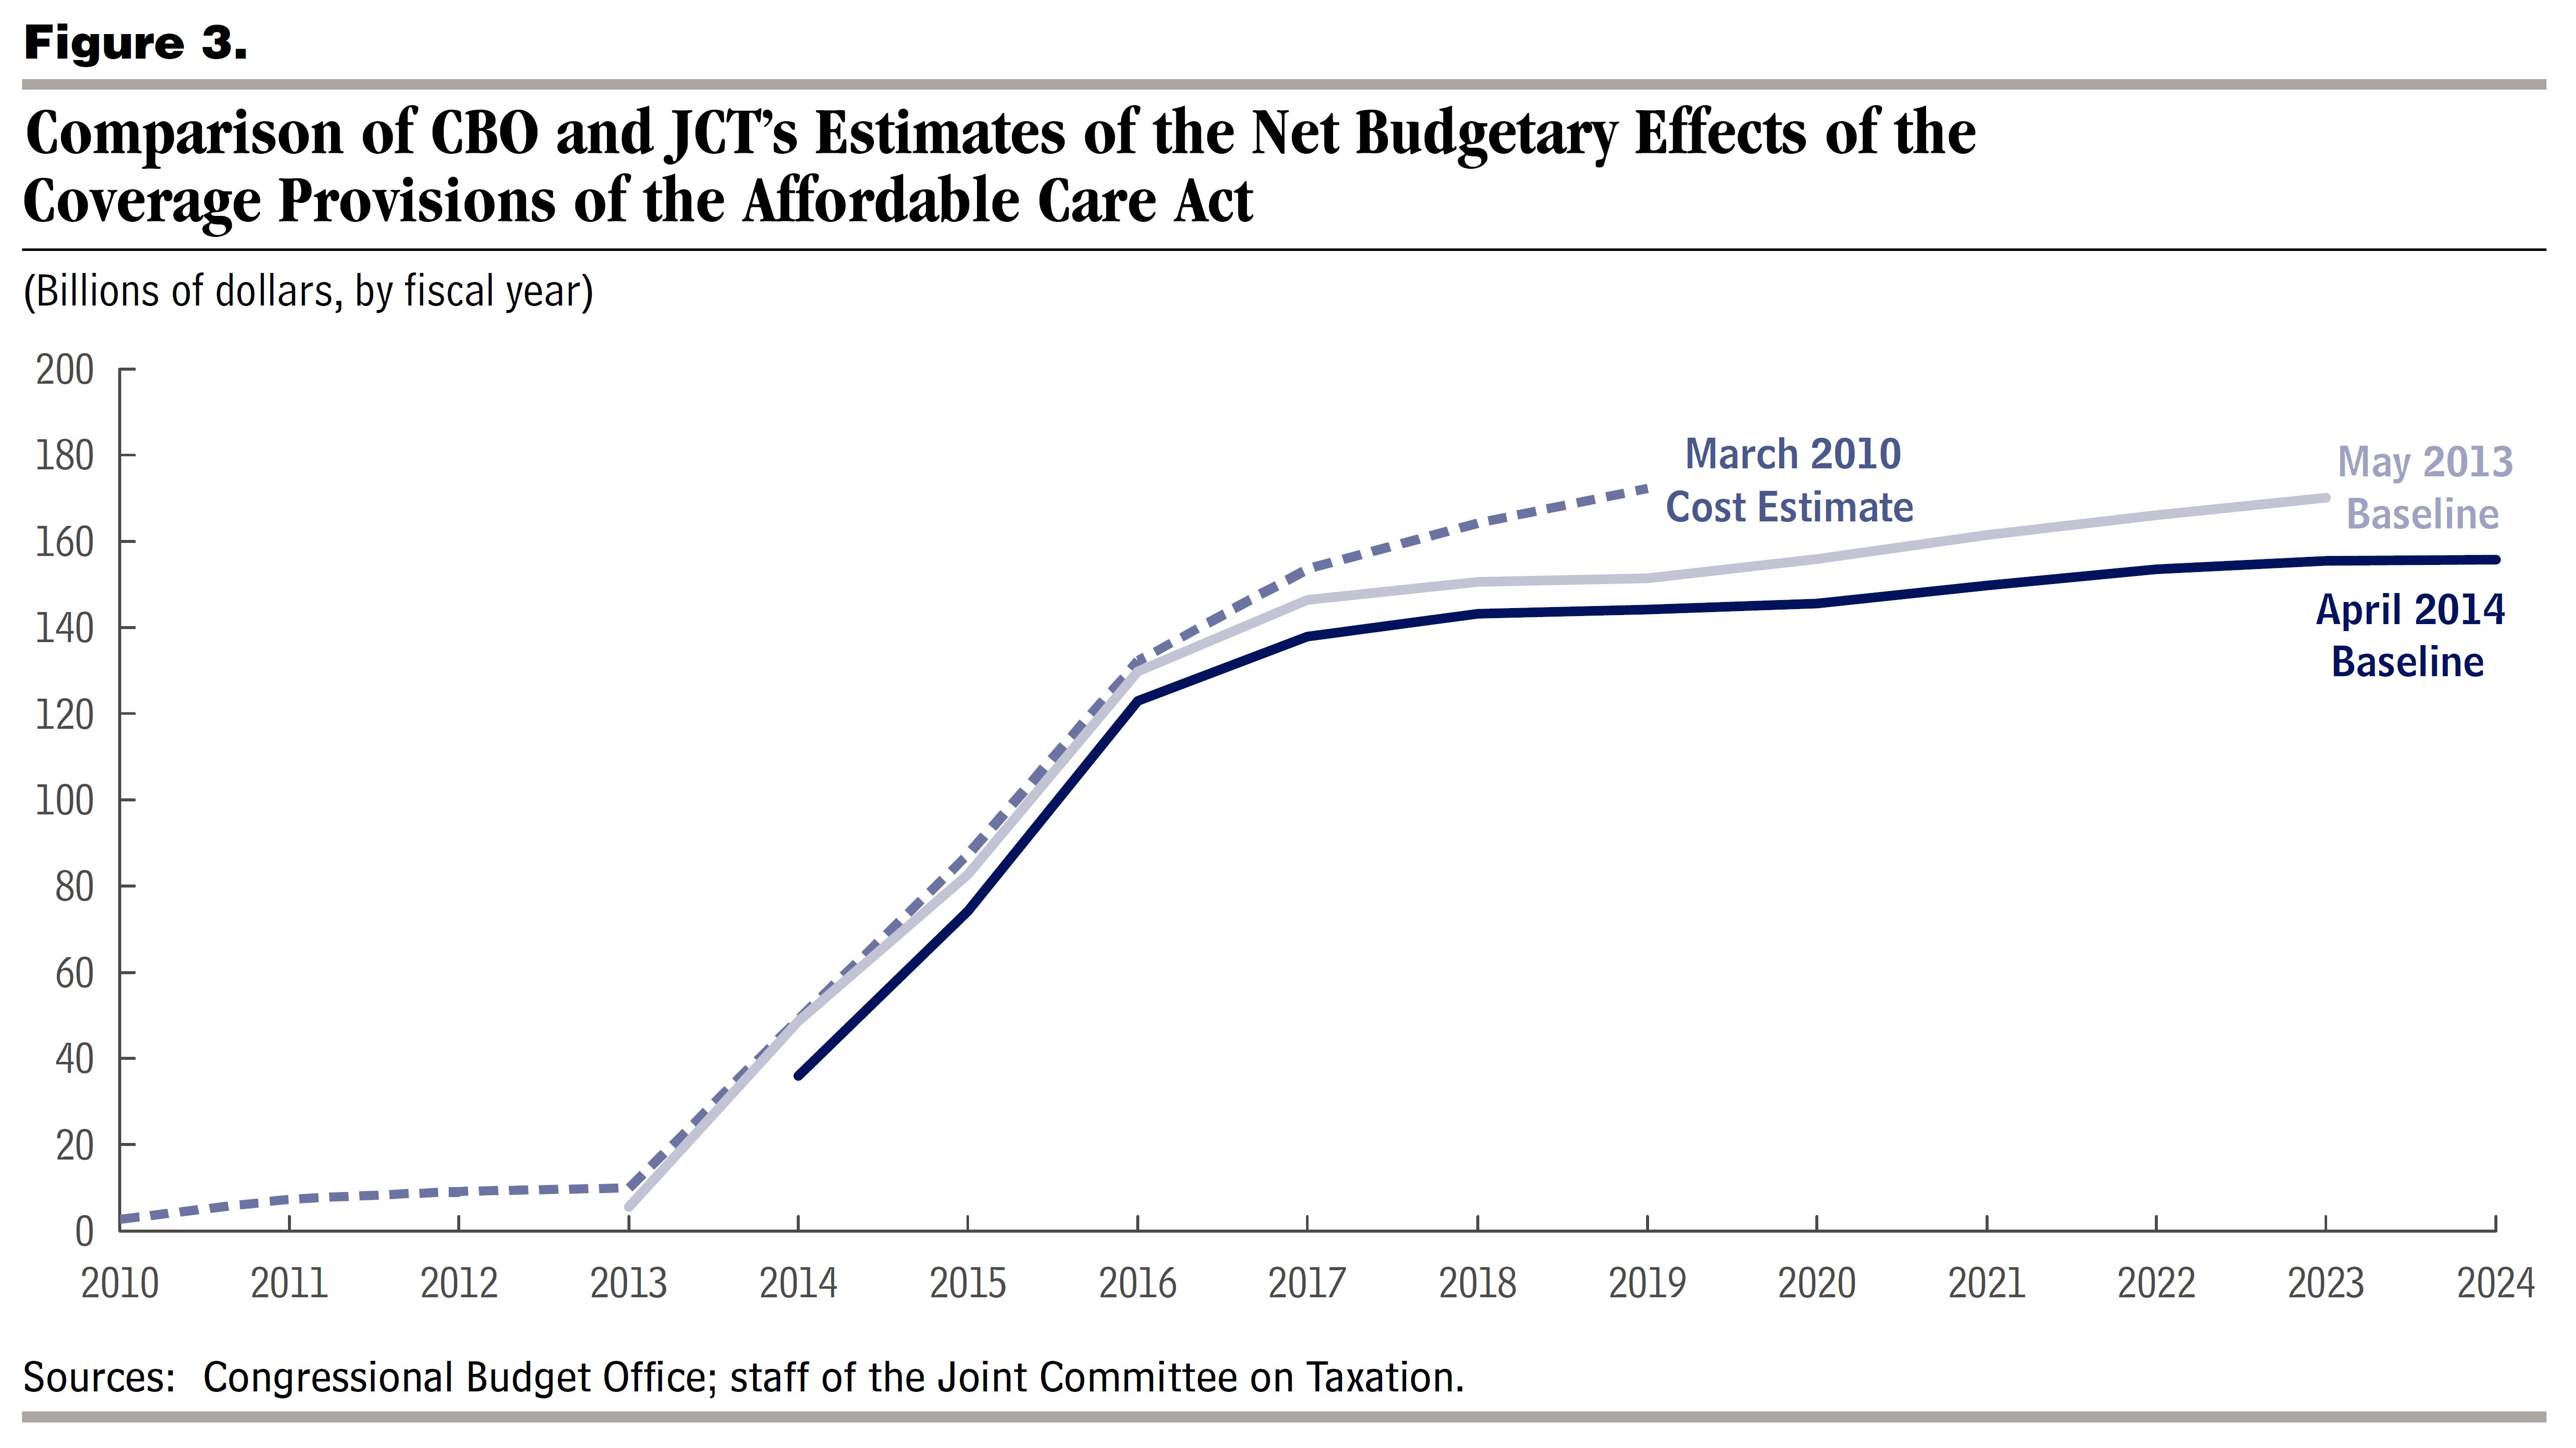 aca-insurance-coverage-cost-update-from-cbo-econbrowser